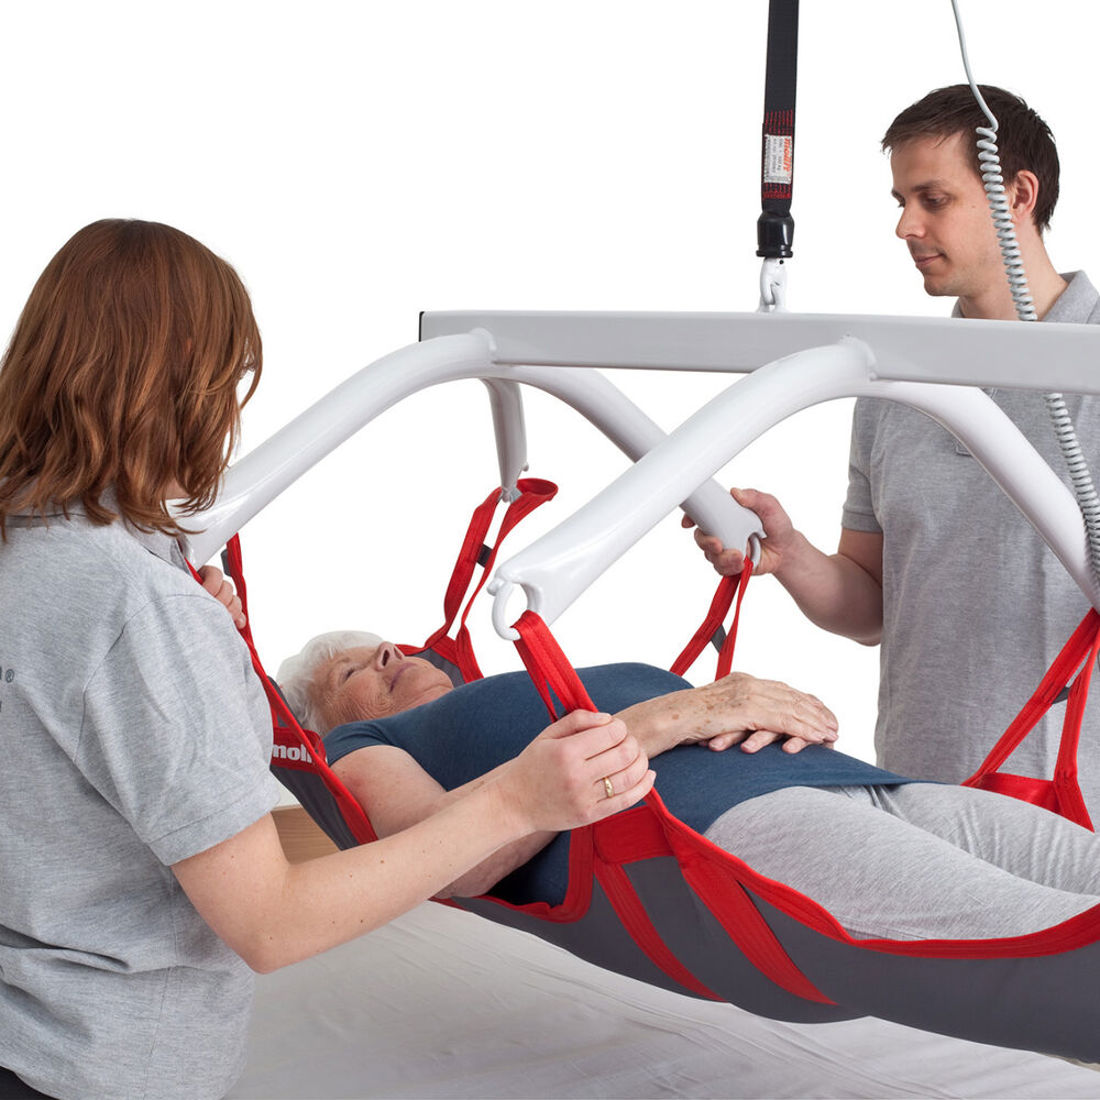 Molift RgoSling Fabric Stretcher is suitable when hoisting in a normal sling would be inappropriate due to medical conditions.